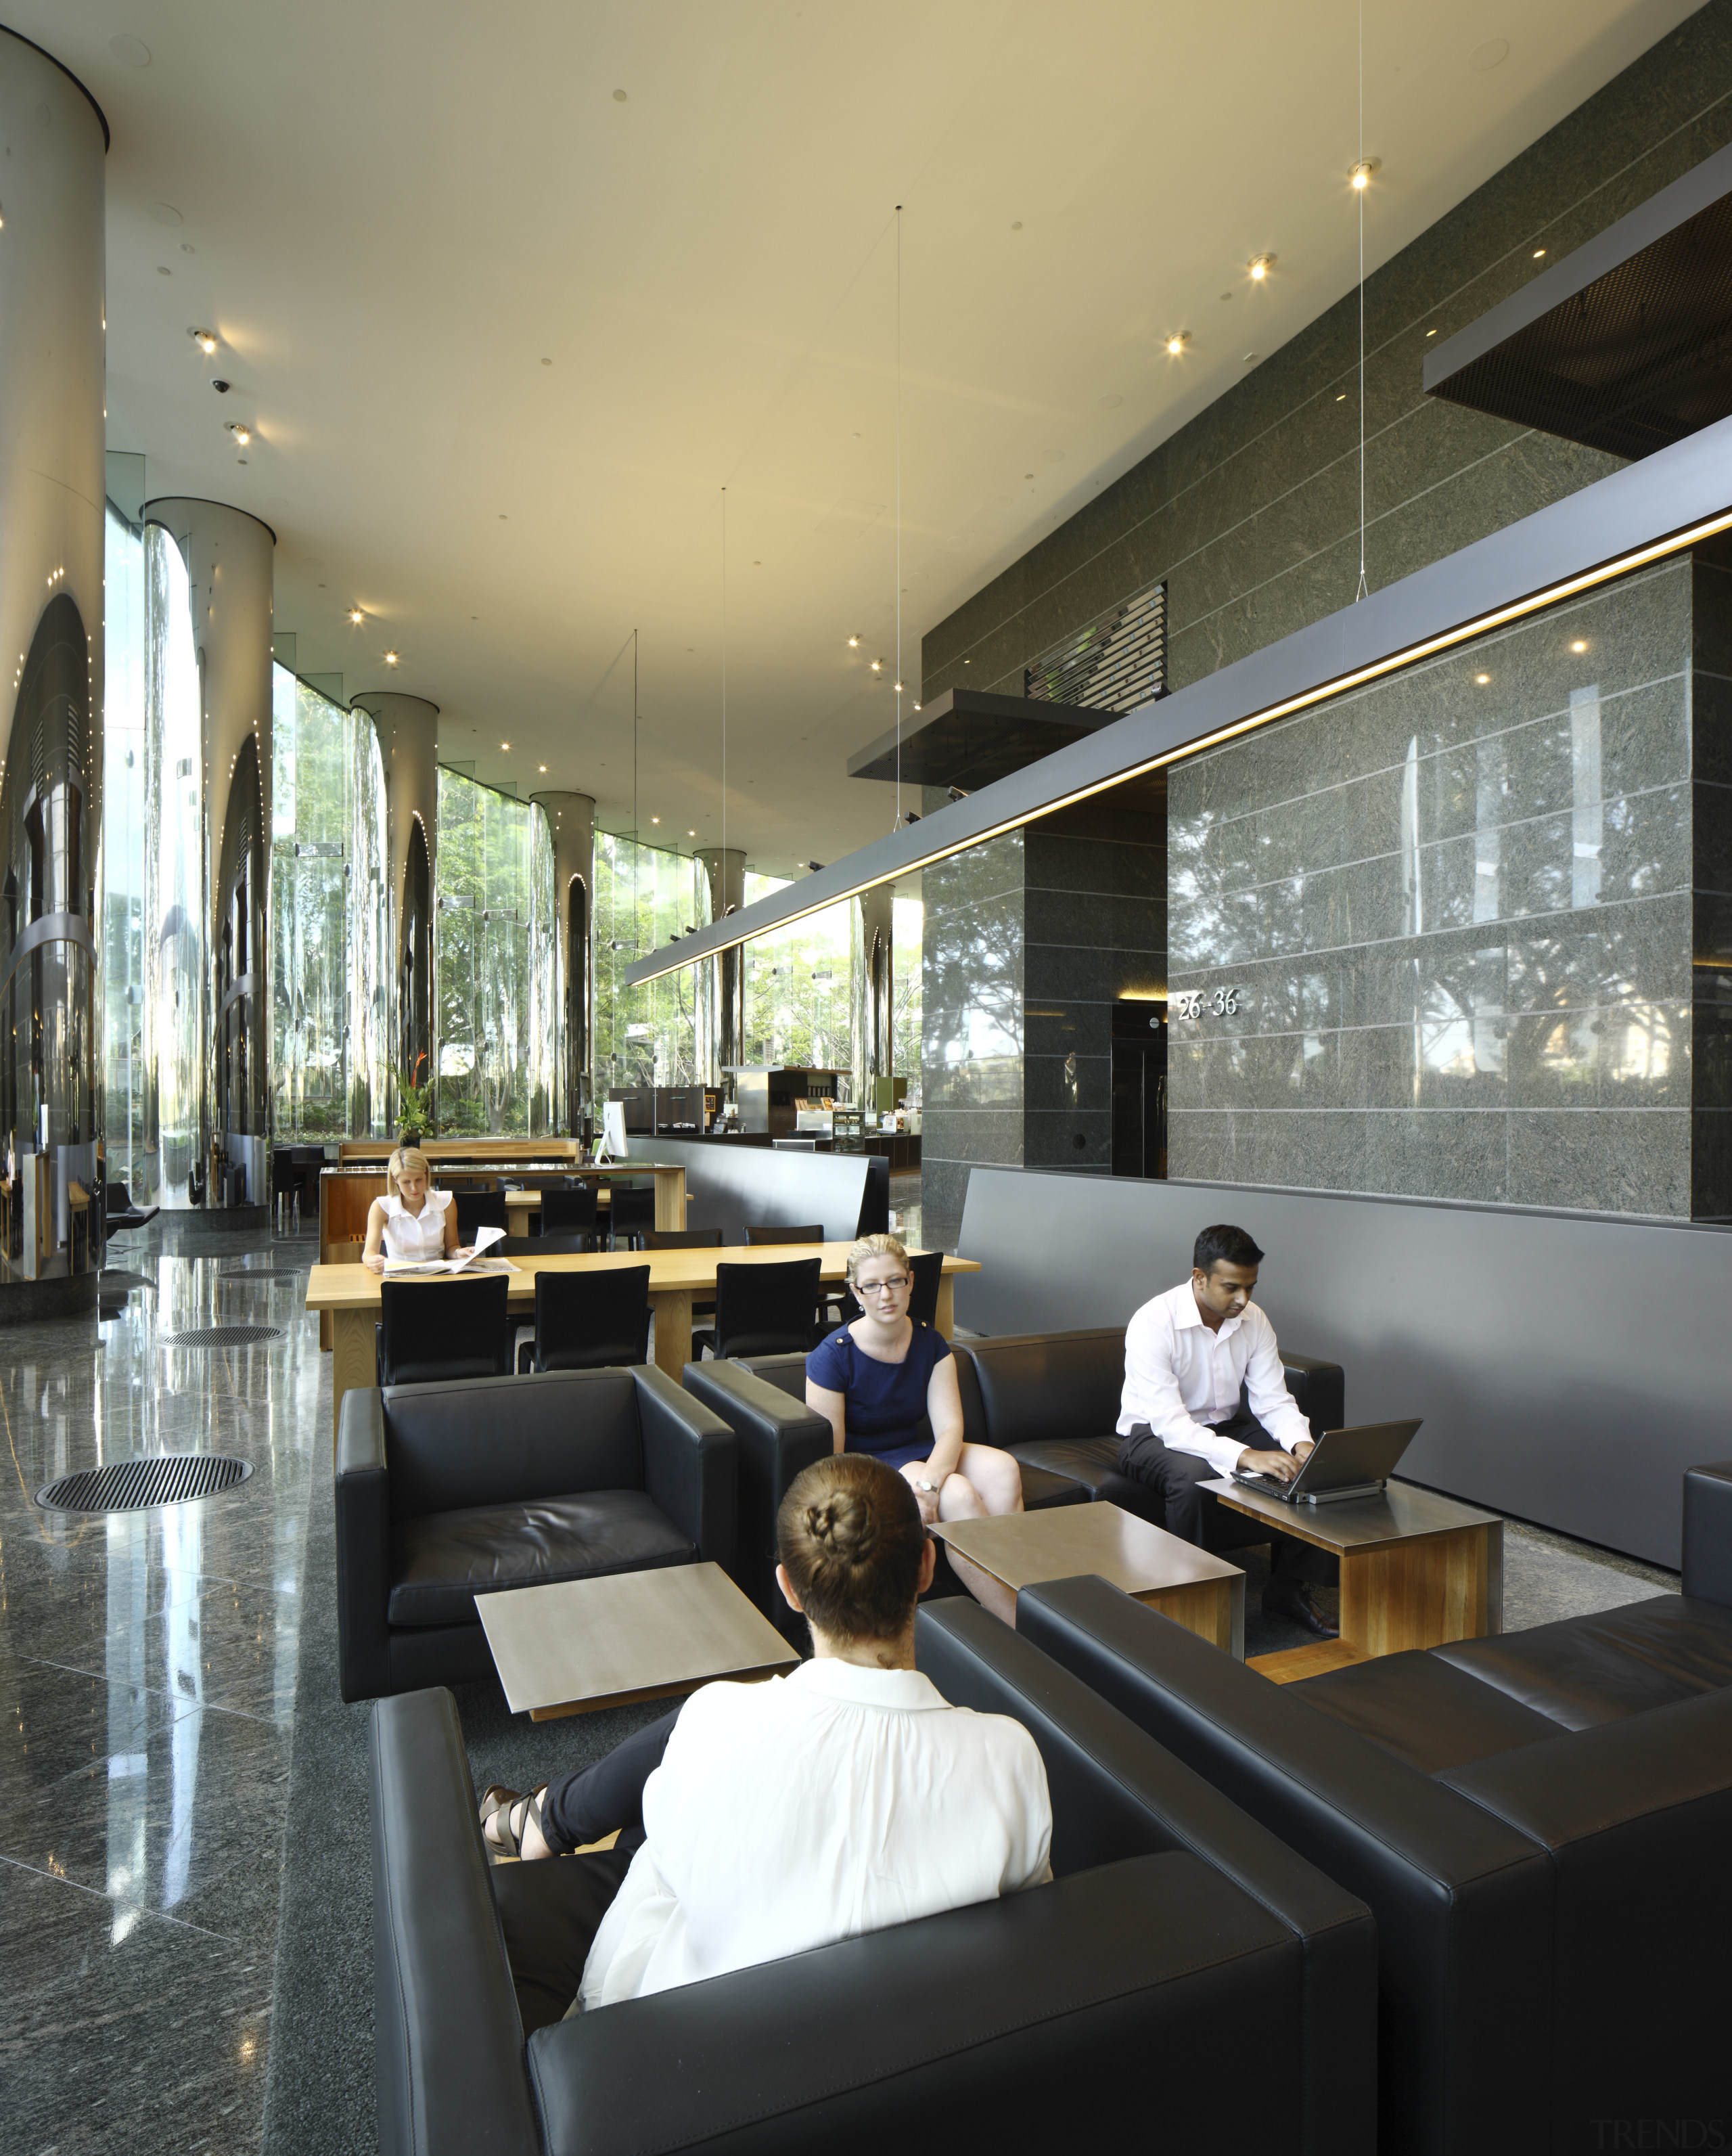 Seating area with black seats. - Seating area furniture, interior design, lobby, restaurant, black, gray